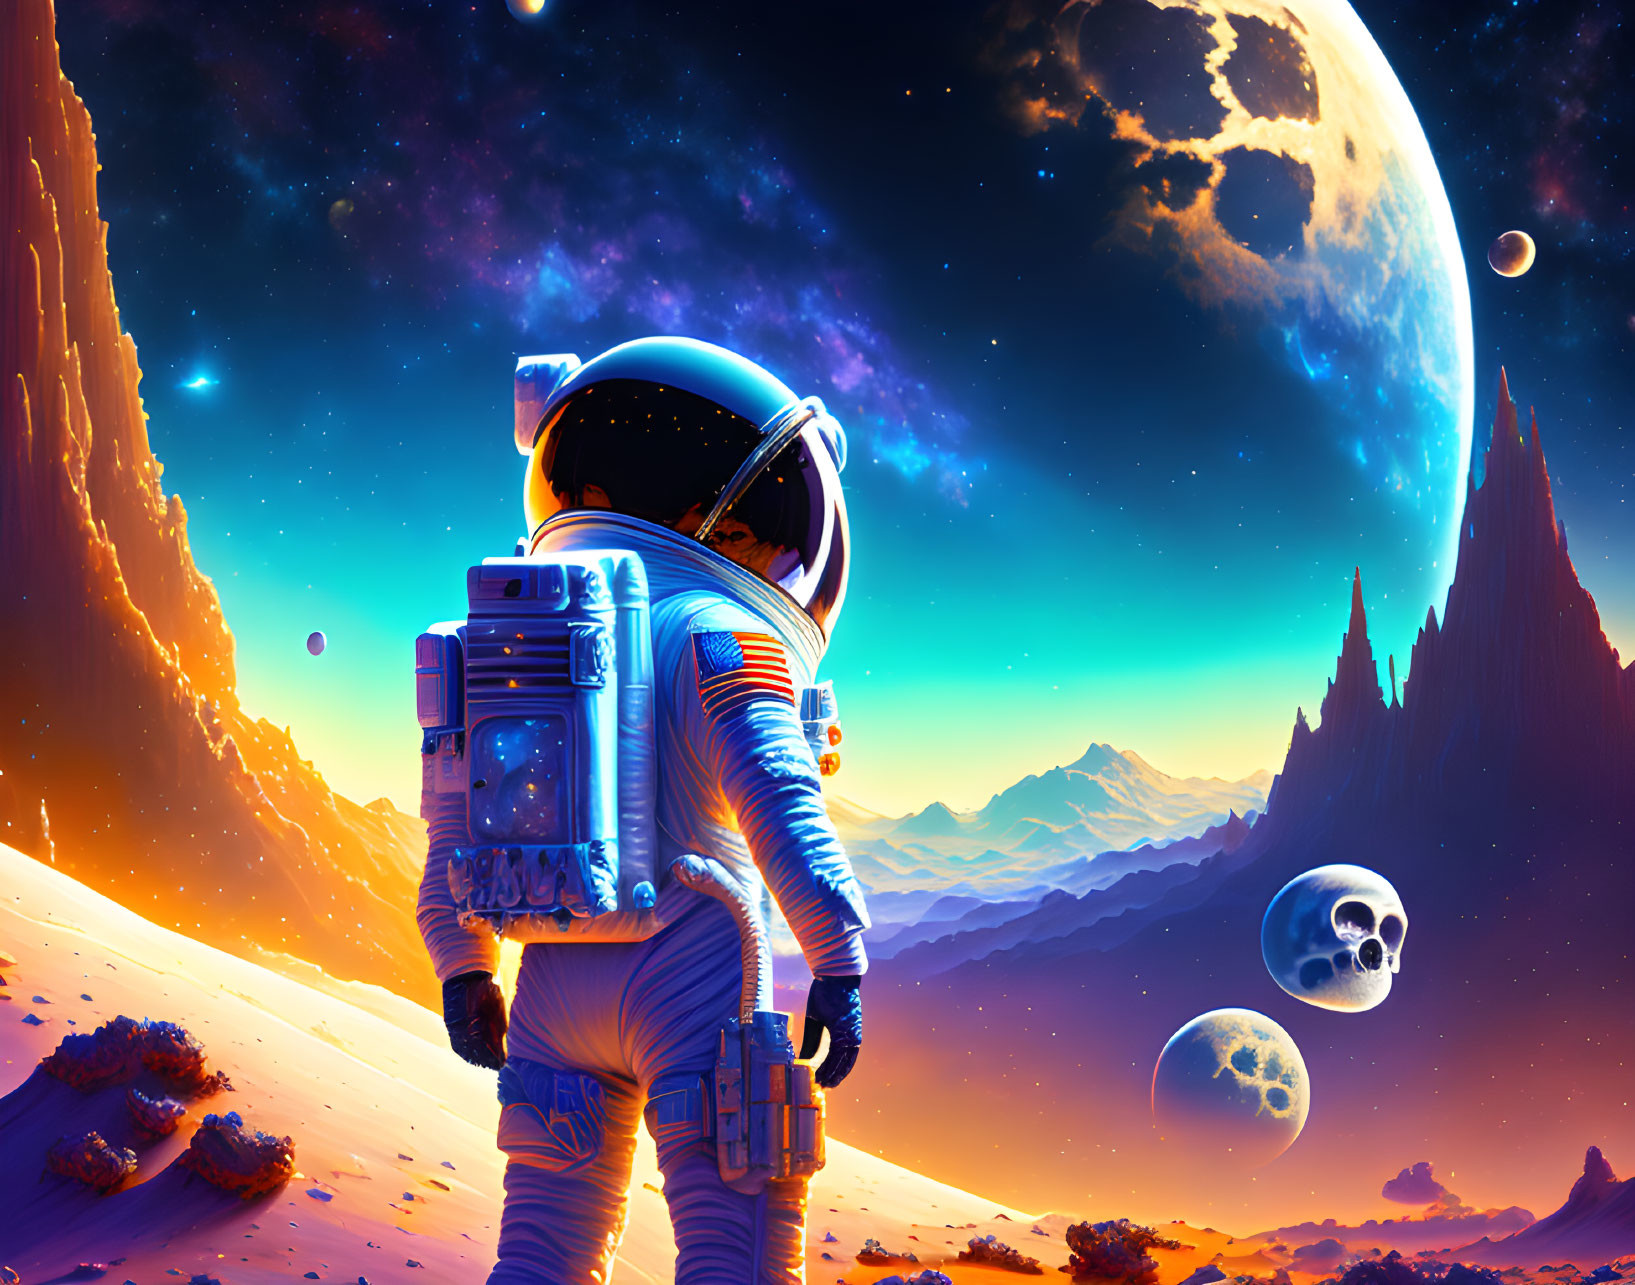 Astronaut on vibrant alien planet with towering mountains and multiple moons